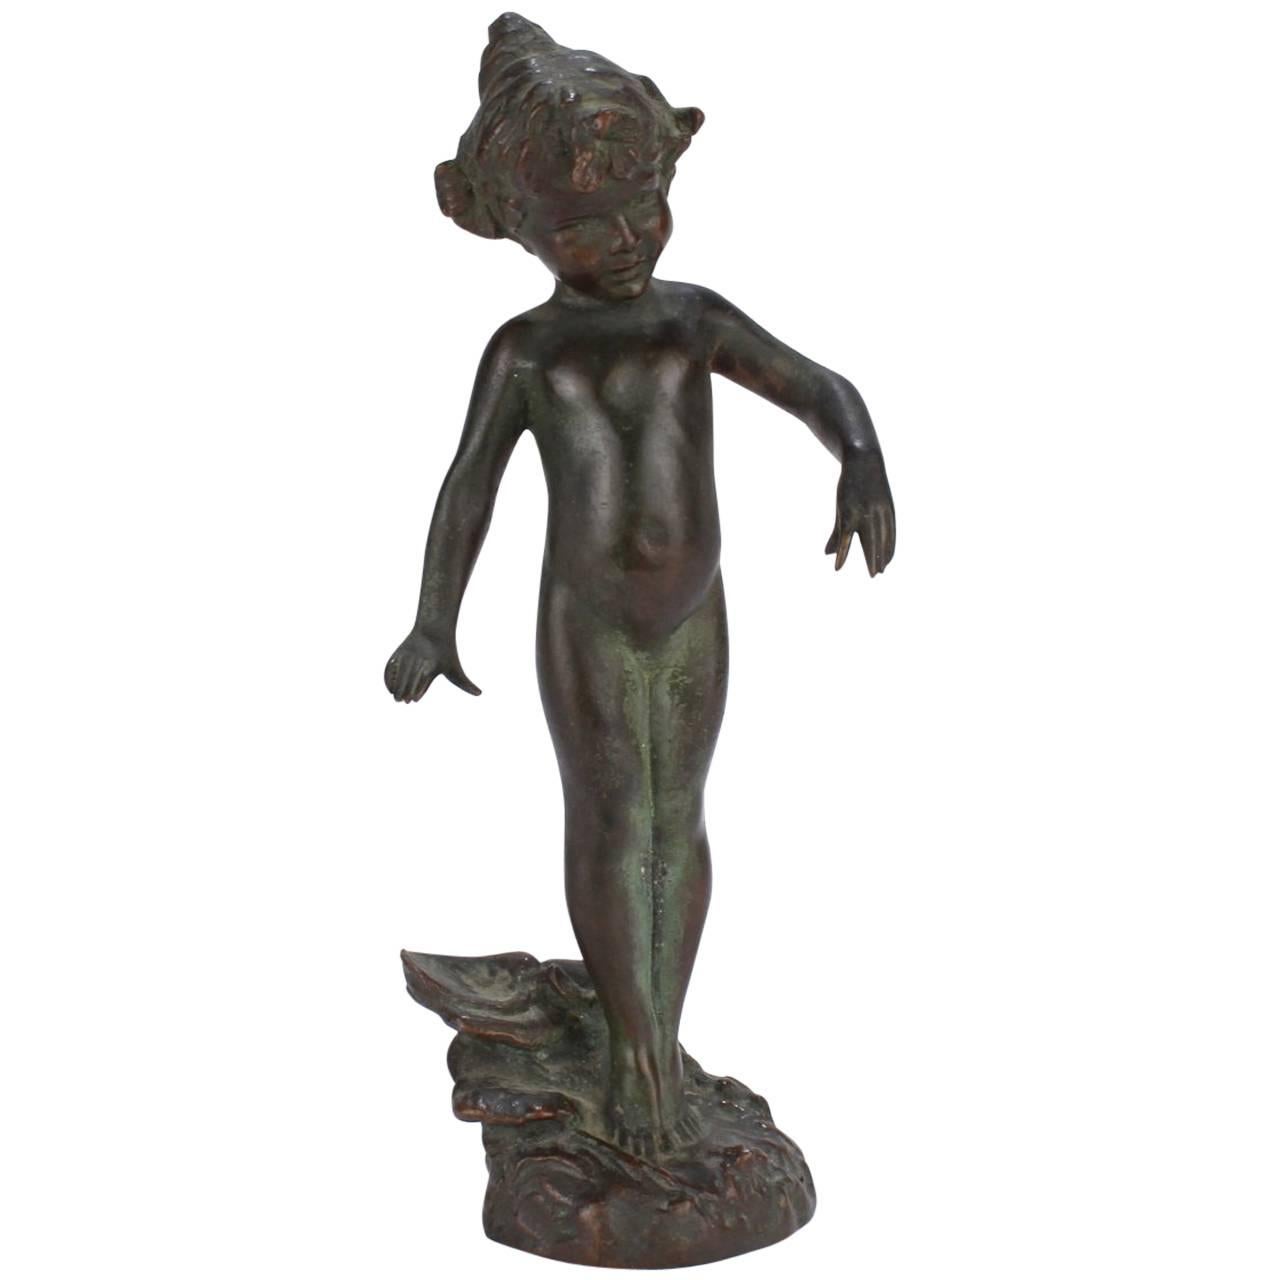 Violet, an Antique Gorham Founders Water Nymph Bronze Sculpture by Edward Berge